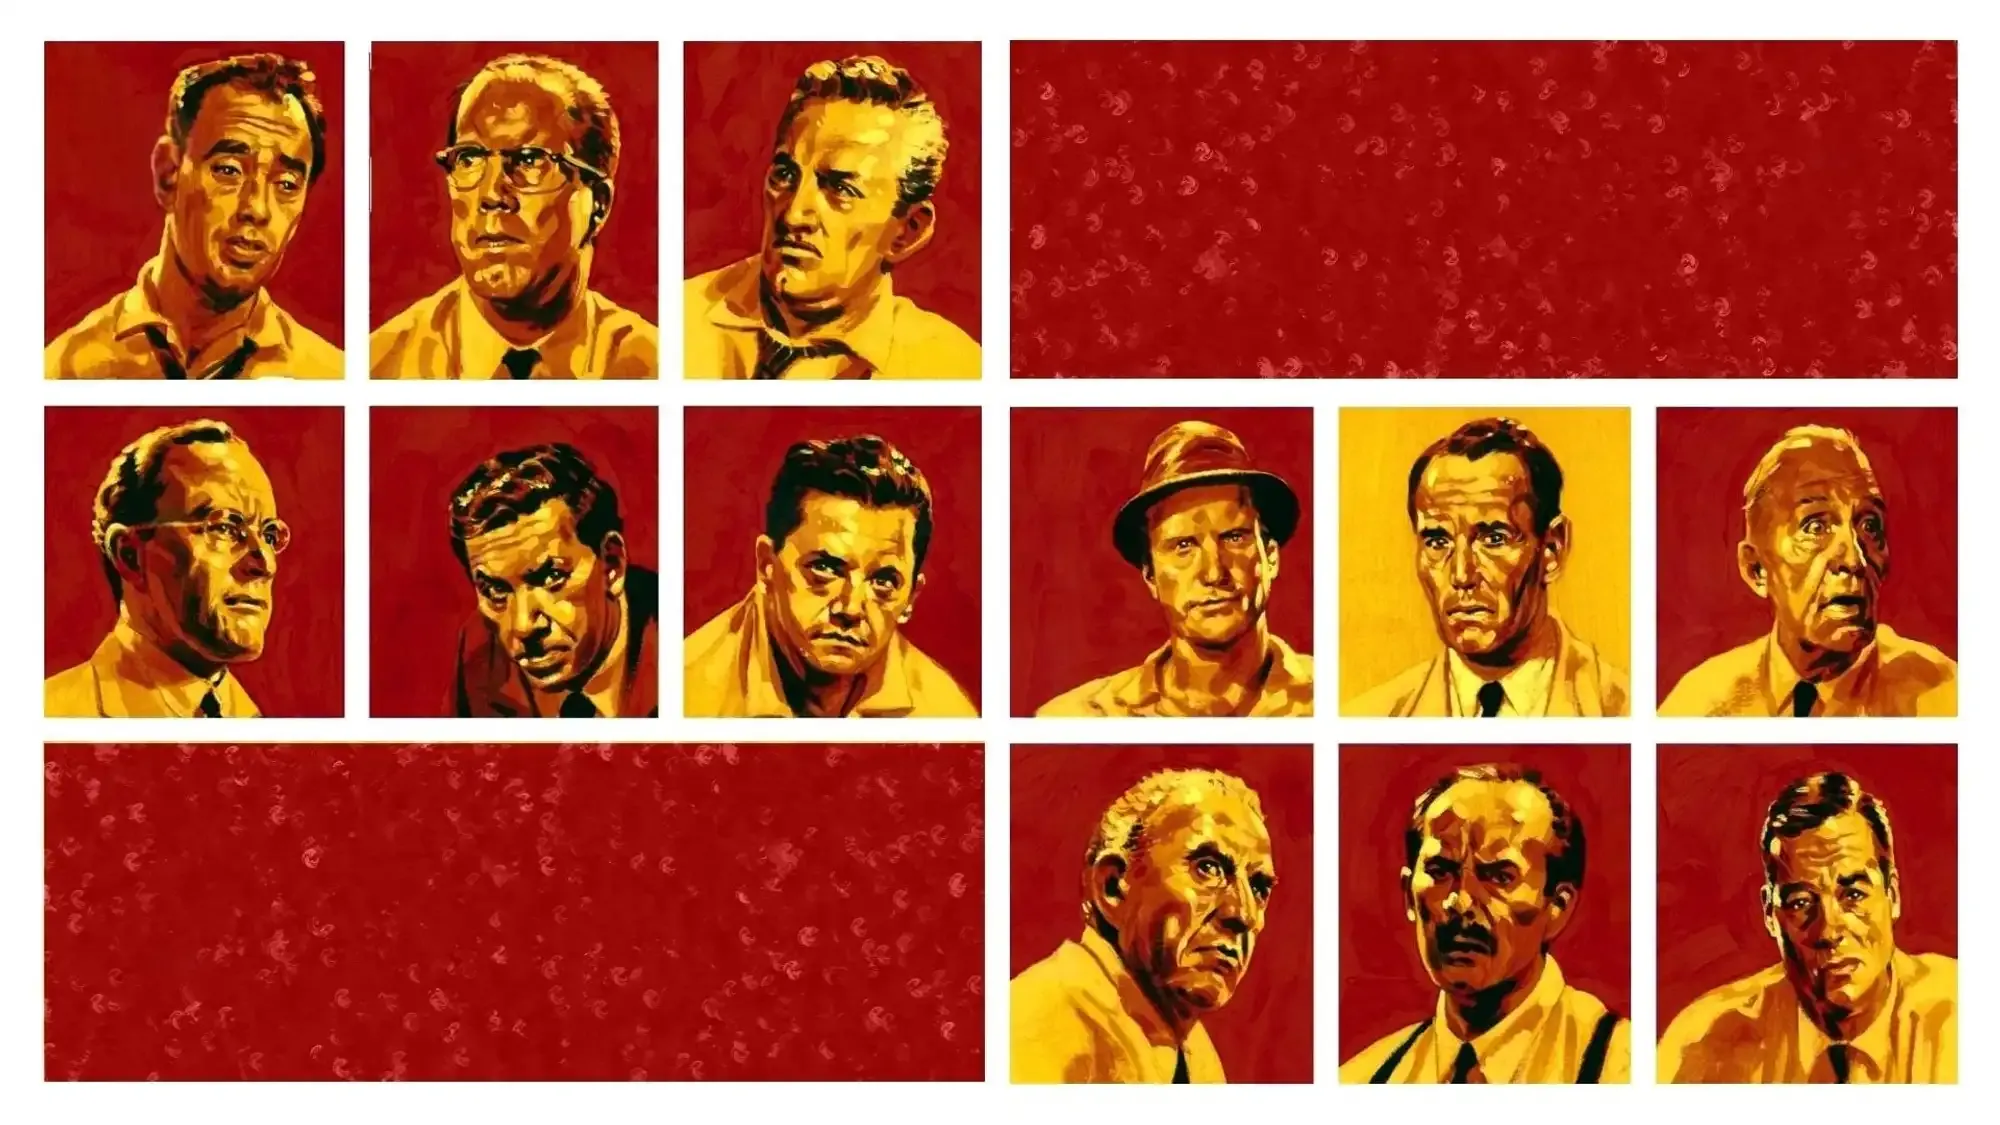 12 Angry Men movie review